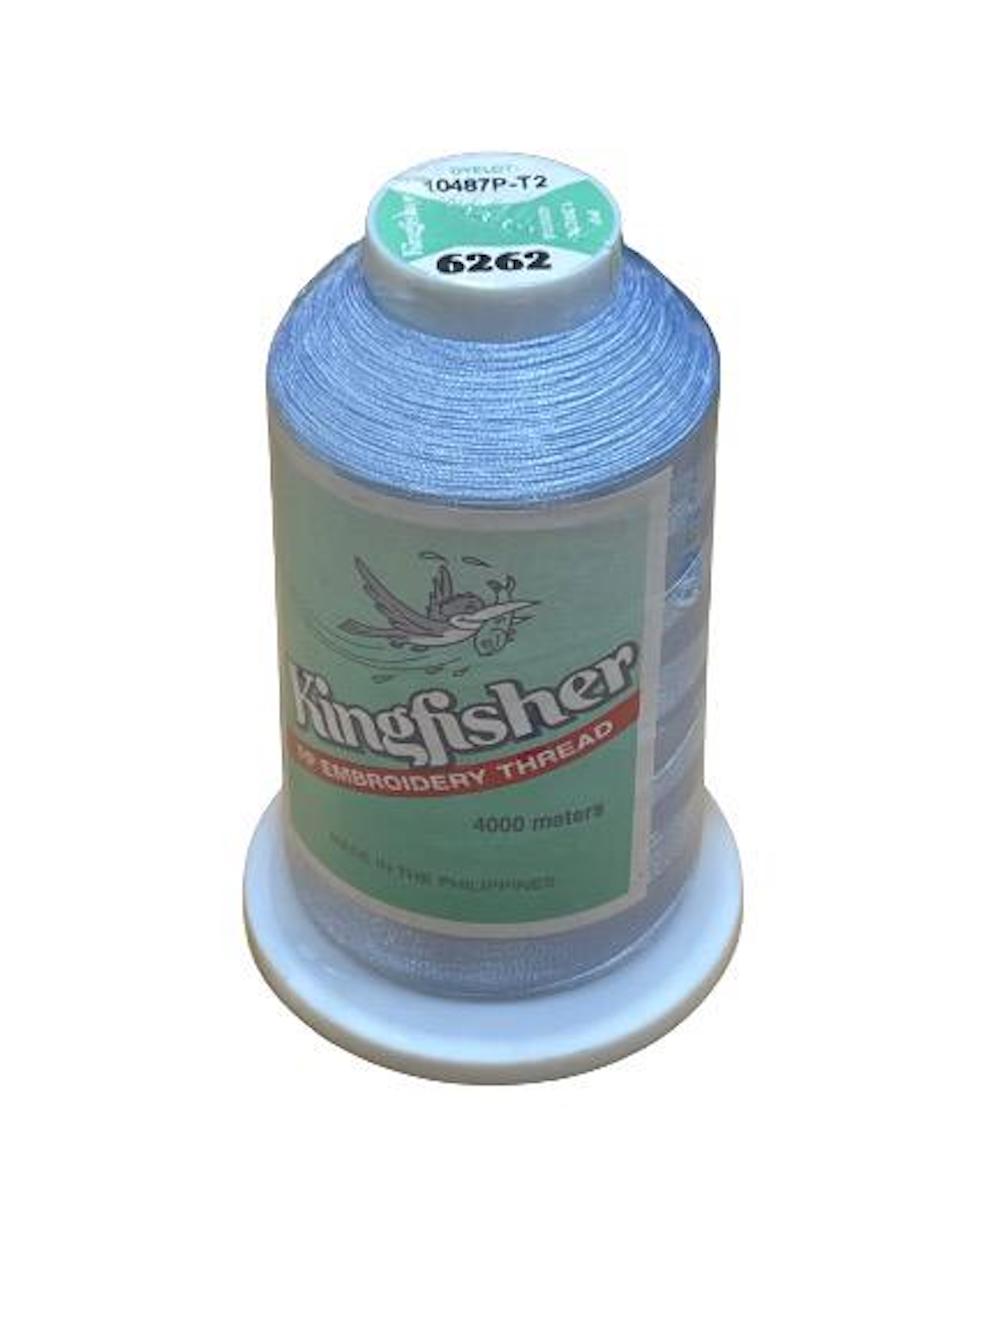 King Fisher Embroidery Thread 4000m 6262 - MY SEWING MALL